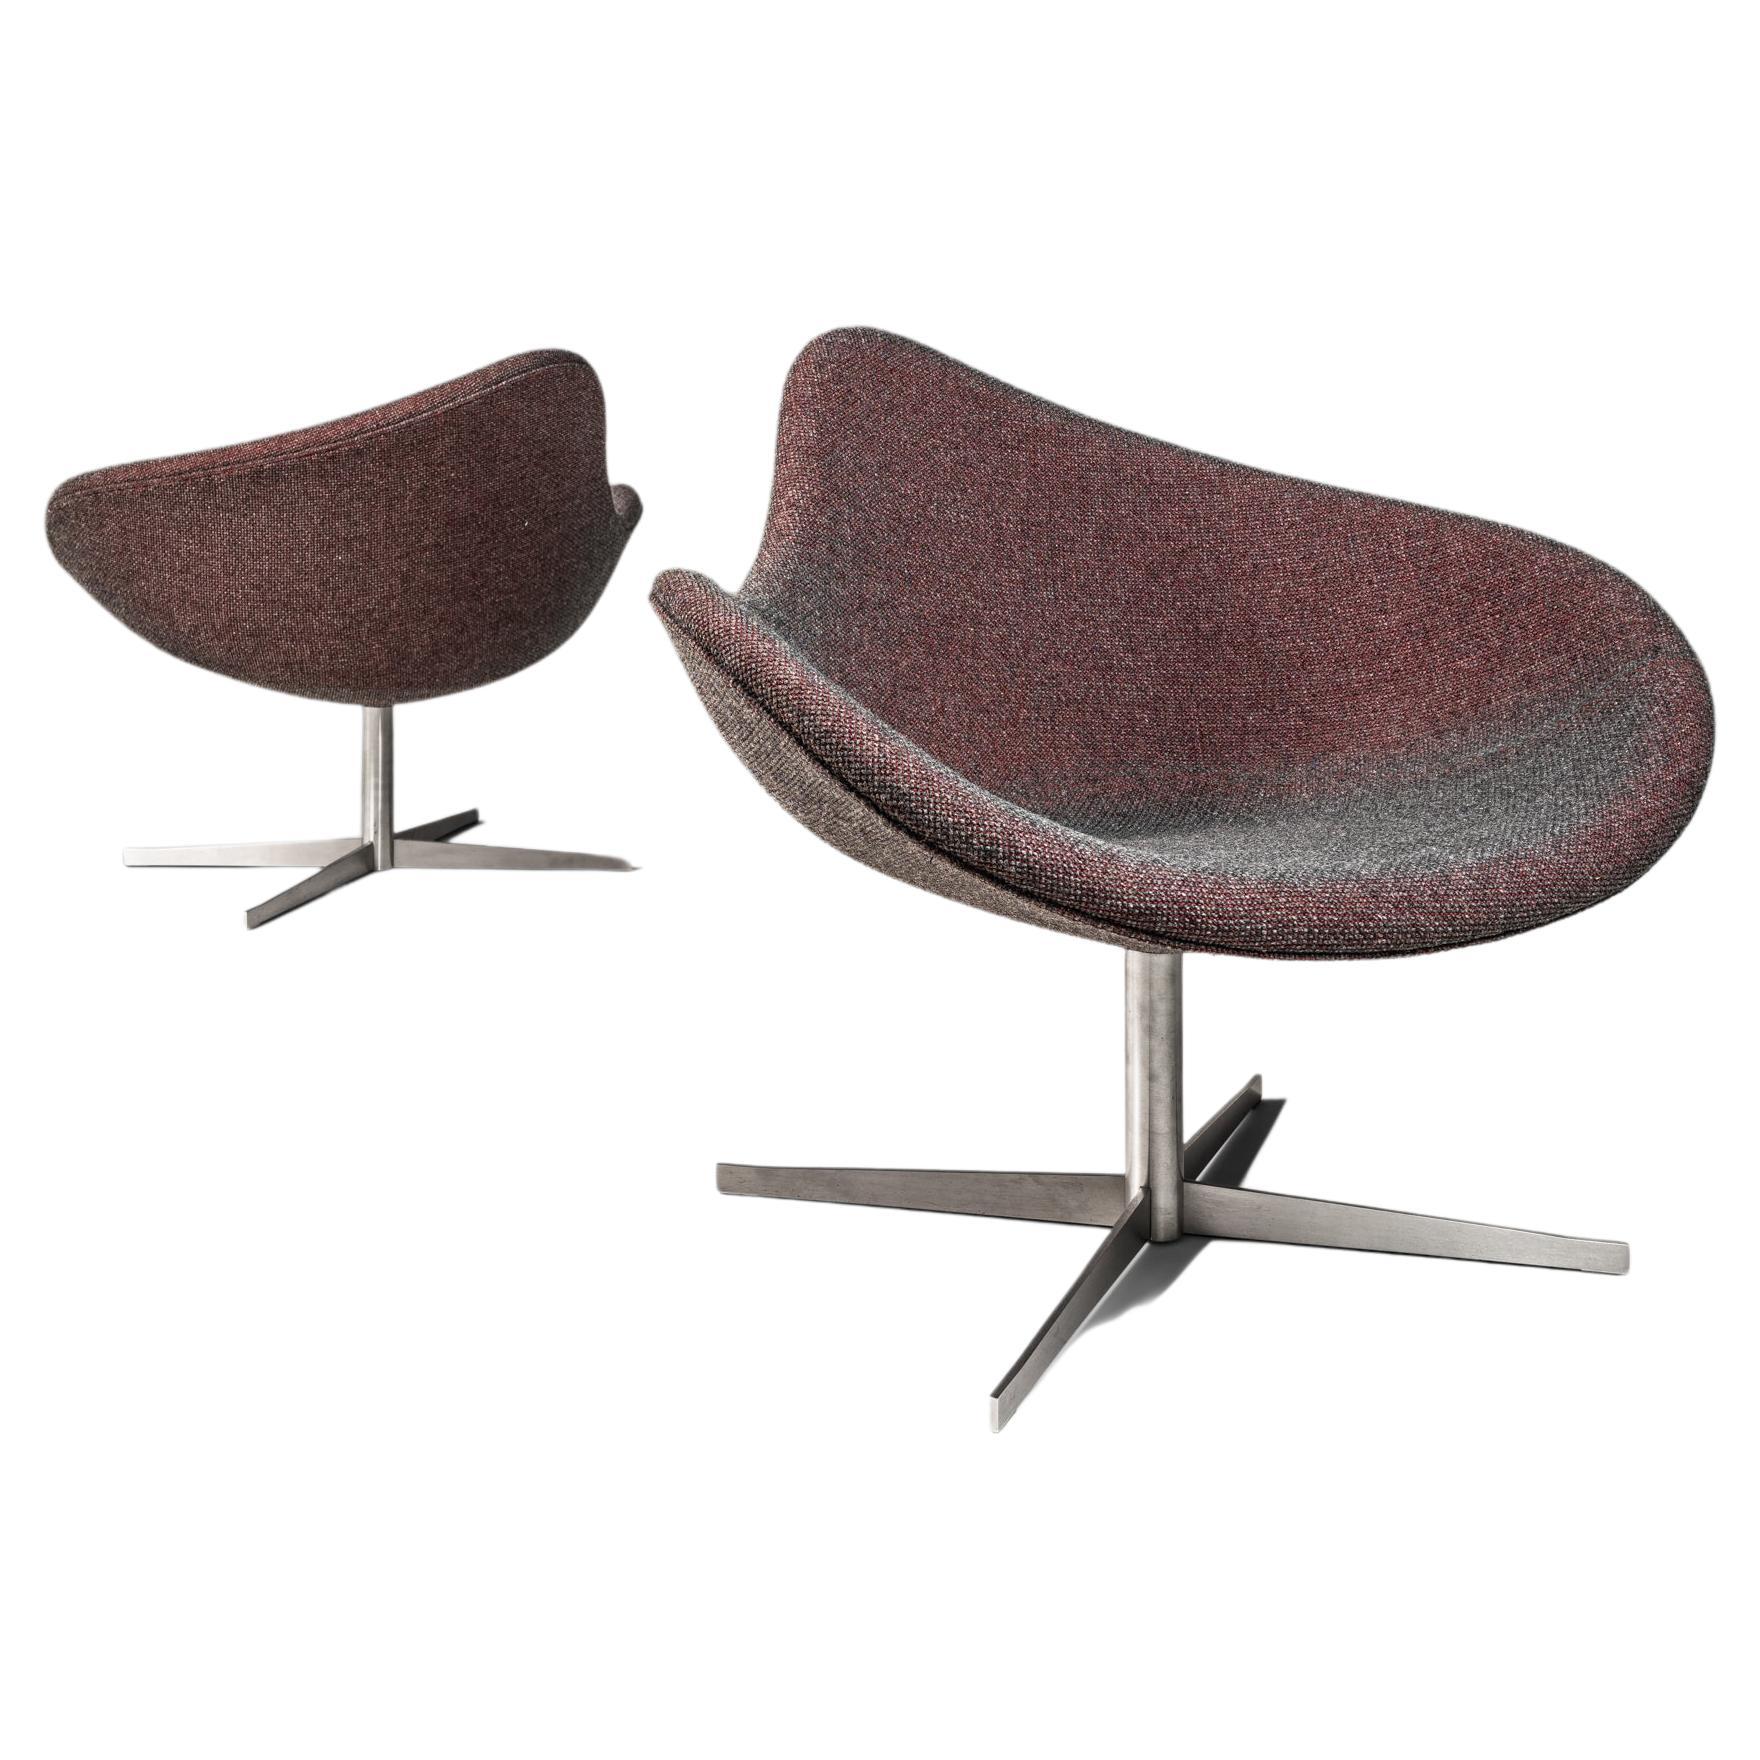 Set of Two Postmodern Swivel-Base "K2" Chairs by Busk & Hertzog, USA, c. 2000's For Sale